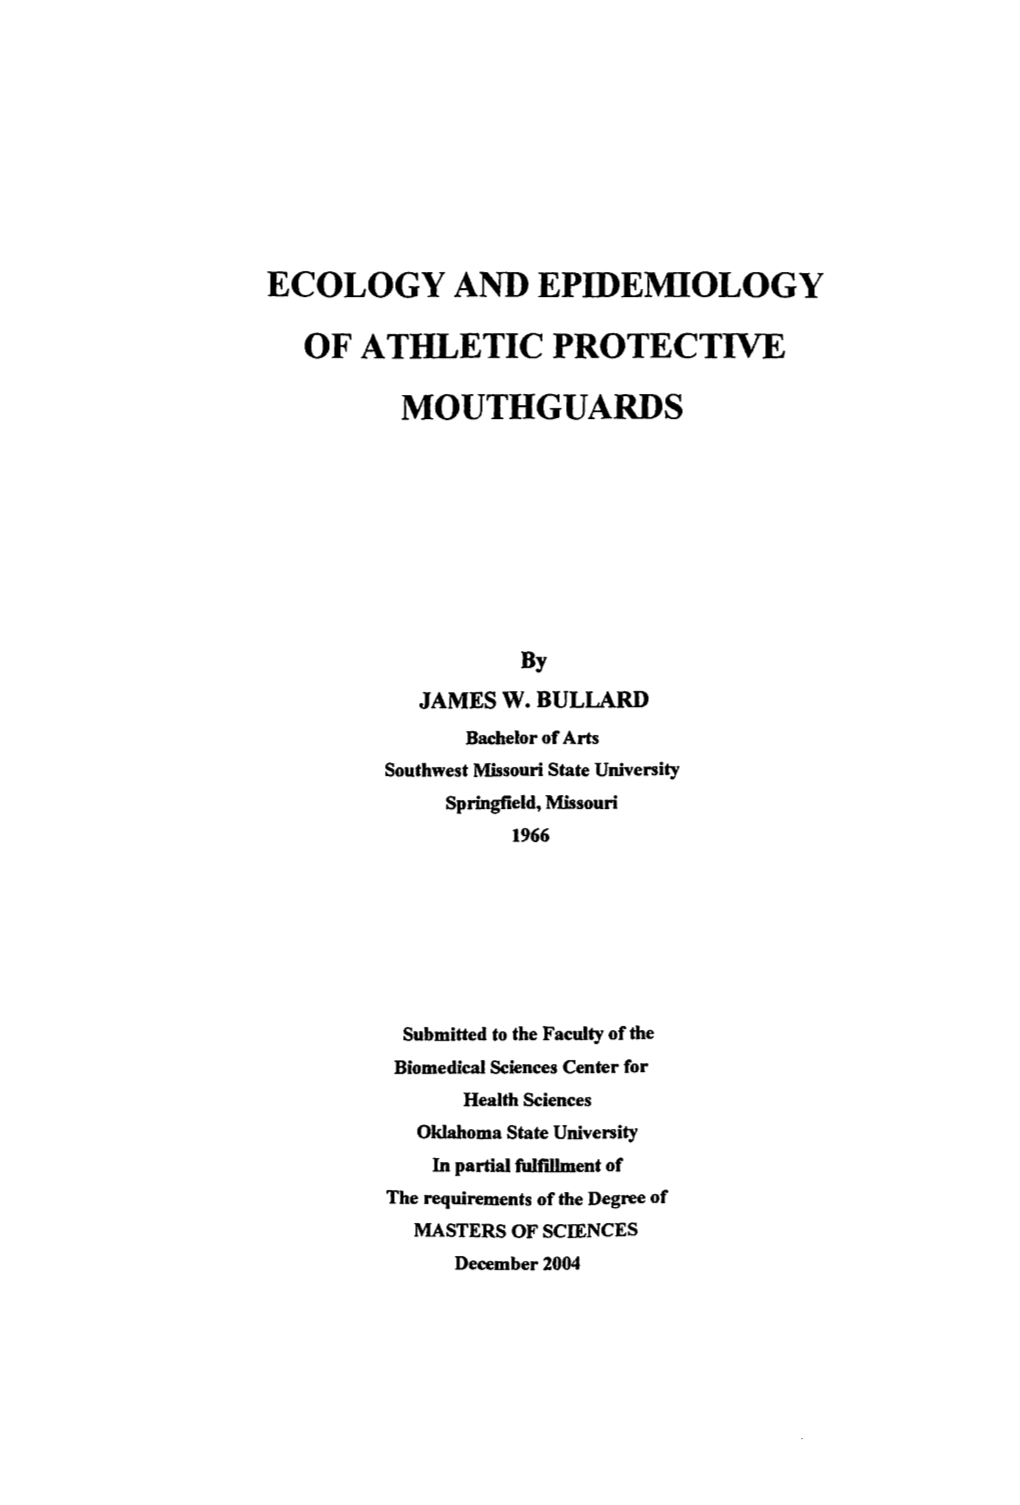 Ecology and Epidemiology of Athletic Protective Mouthguards